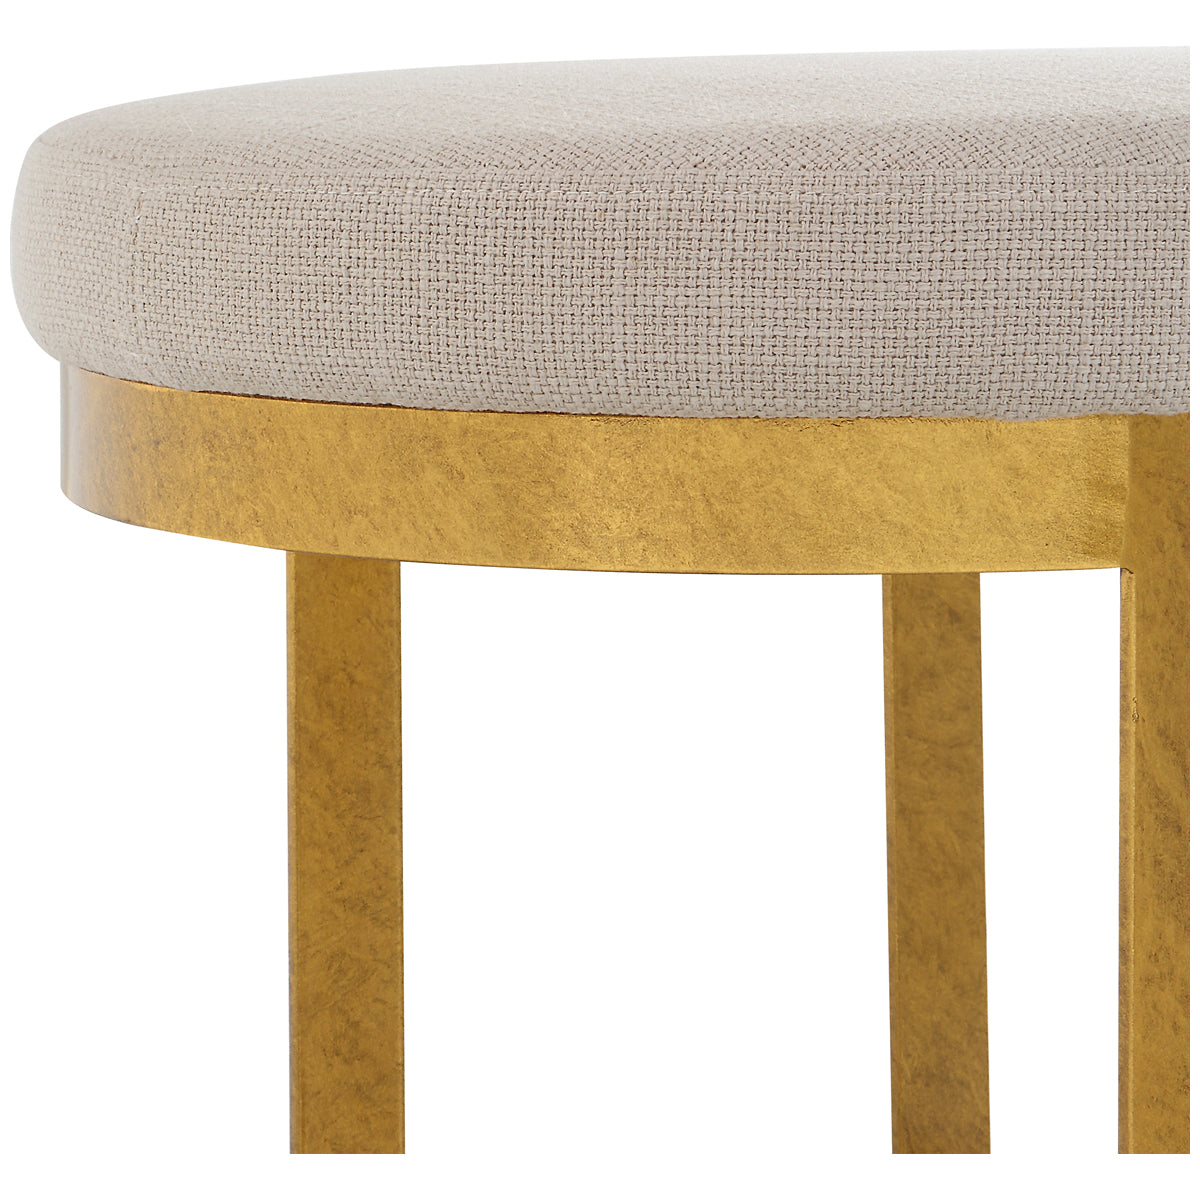 Uttermost Infinity Accent Stool